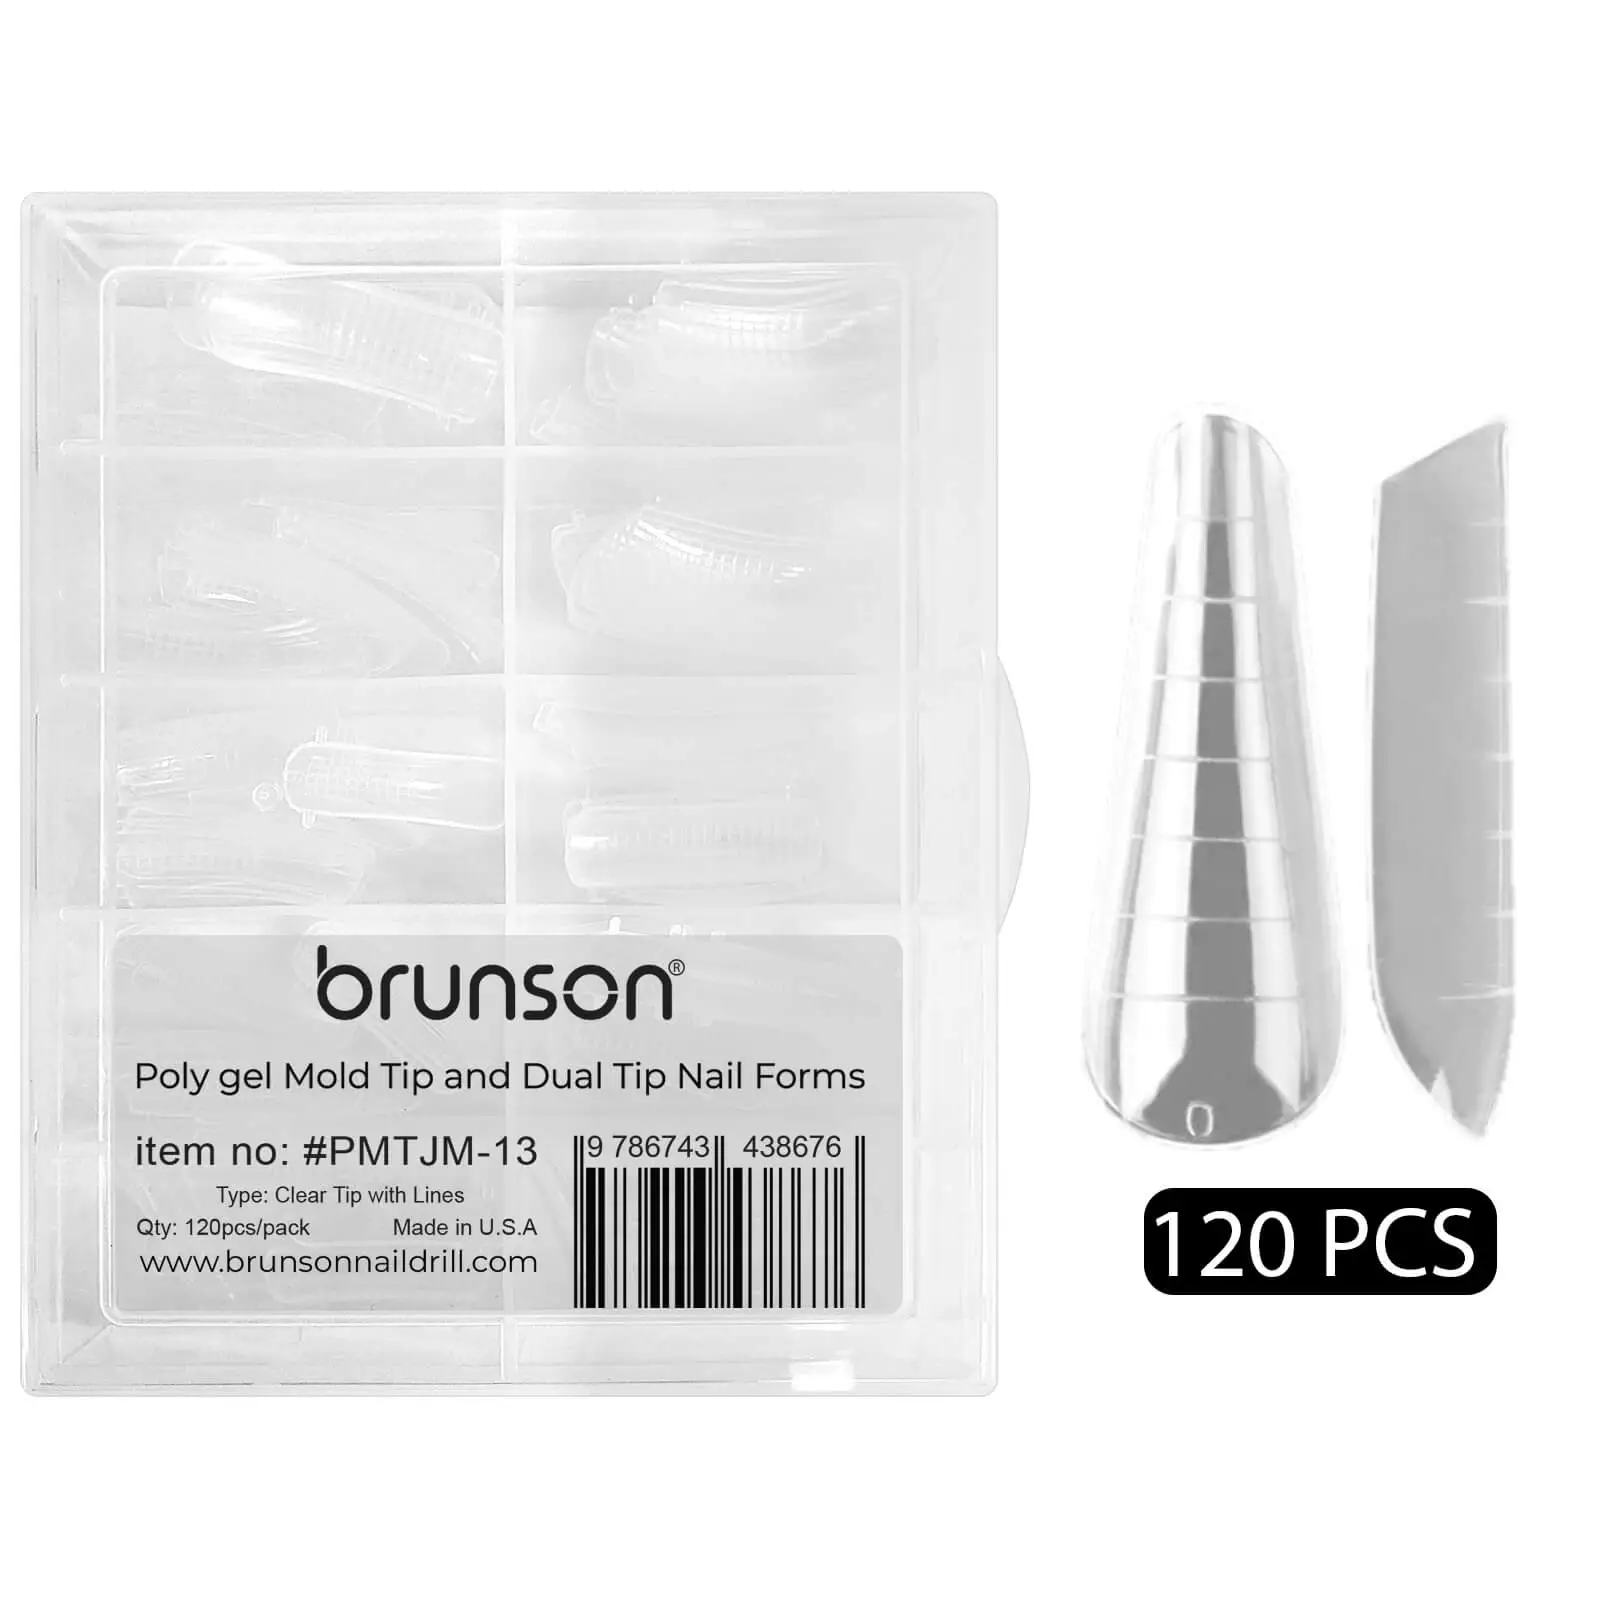 Poly-Gel-Mold-Tip-and-Dual-Tip-Nail-Forms-PMTJM-13-Brunson-1